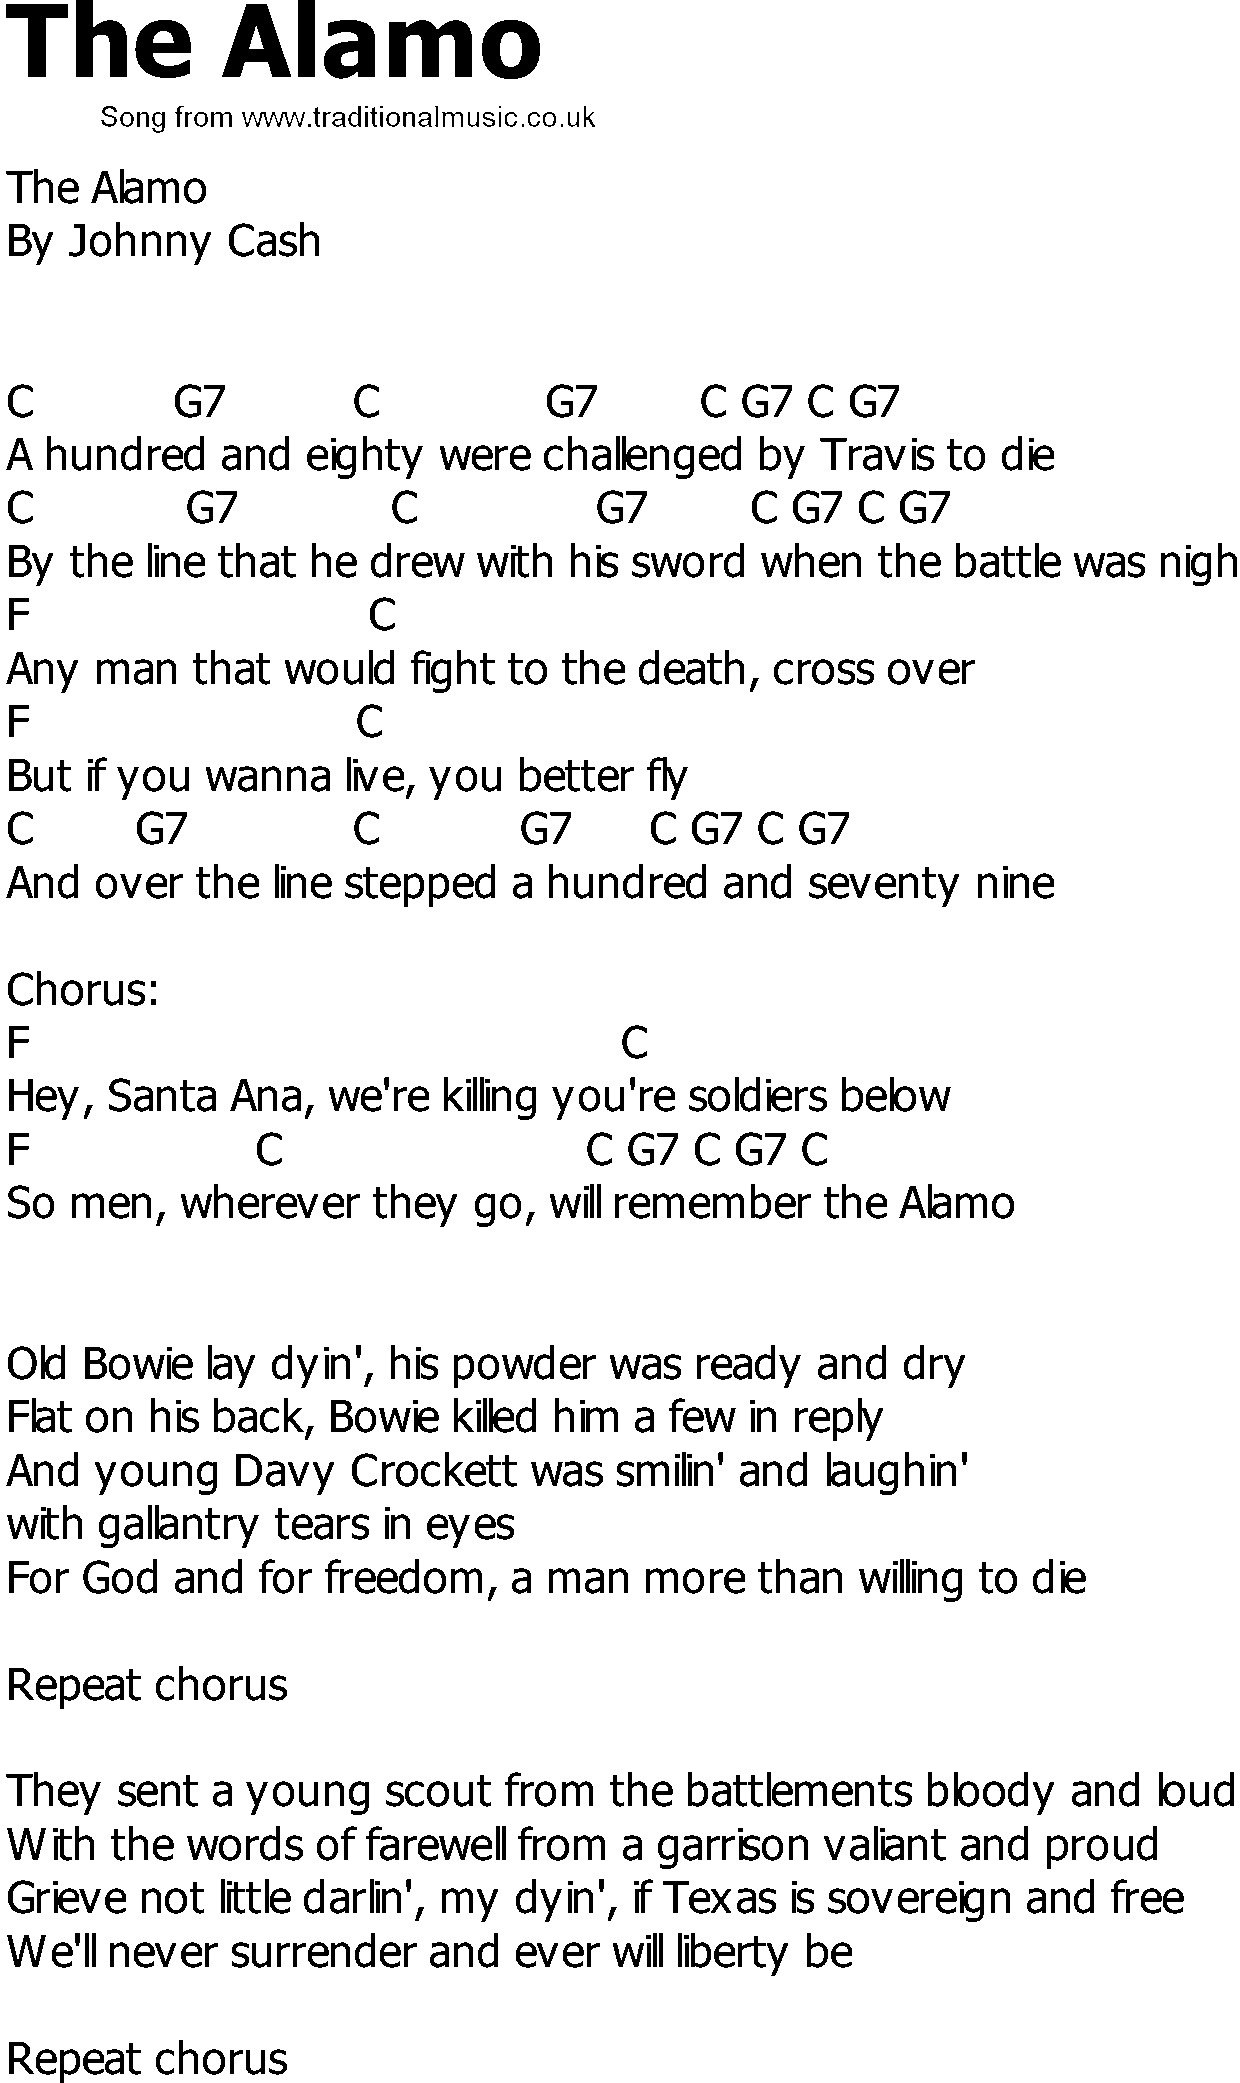 Old Country song lyrics with chords - The Alamo